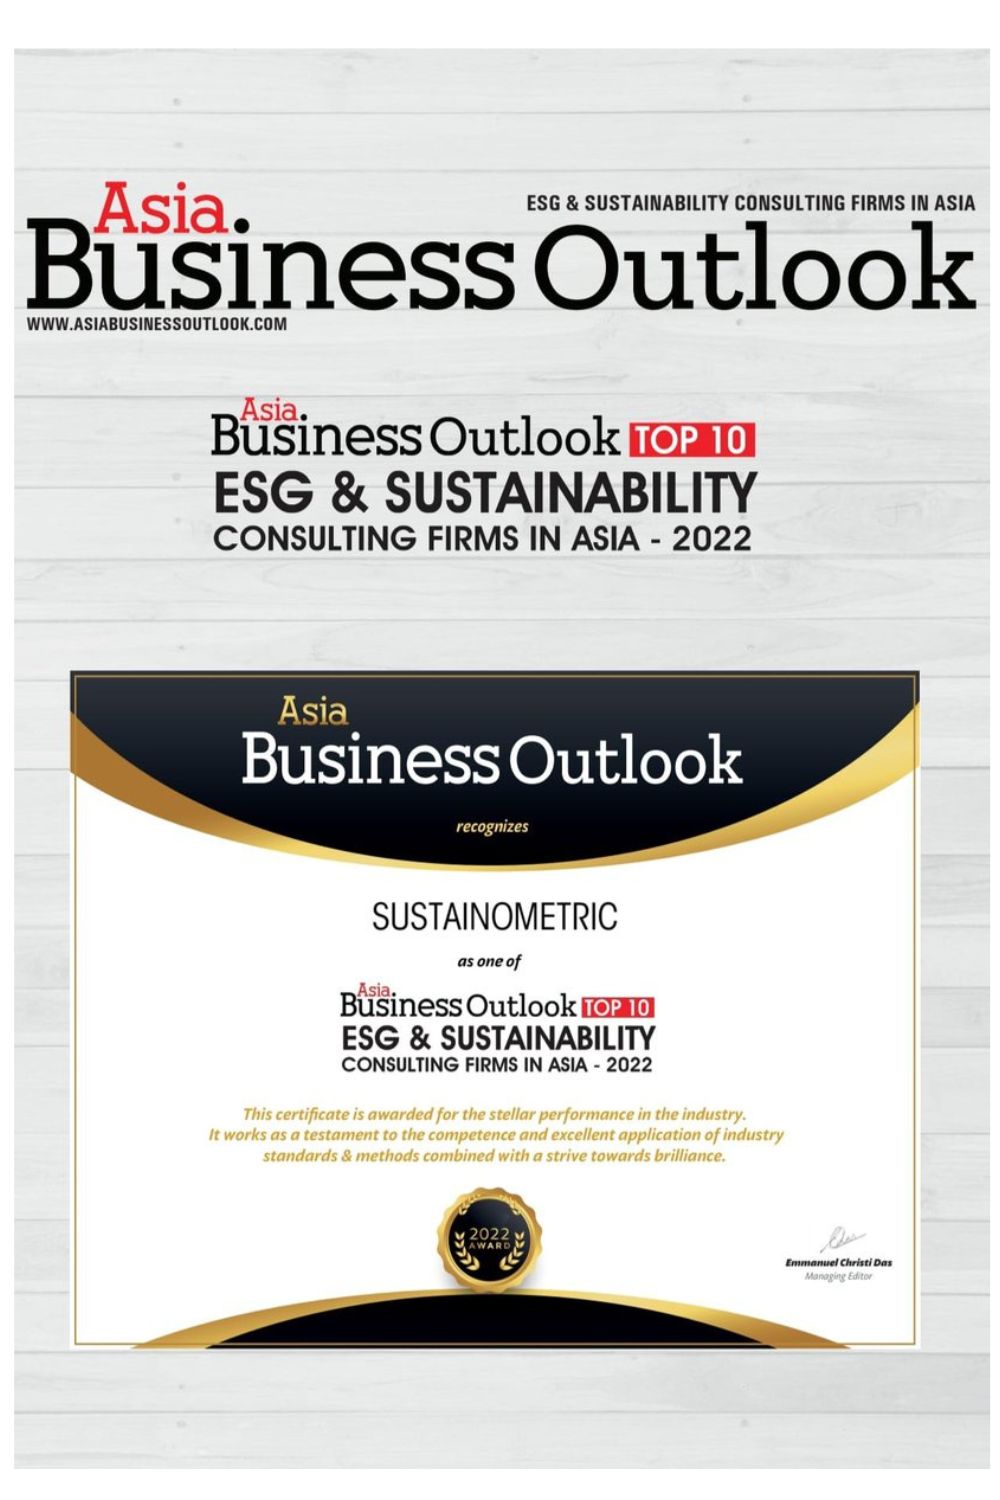 Business Outlook Top 10 - ESG & Sustainability Consulting Firms in Asia - 2022 - SustainoMetric